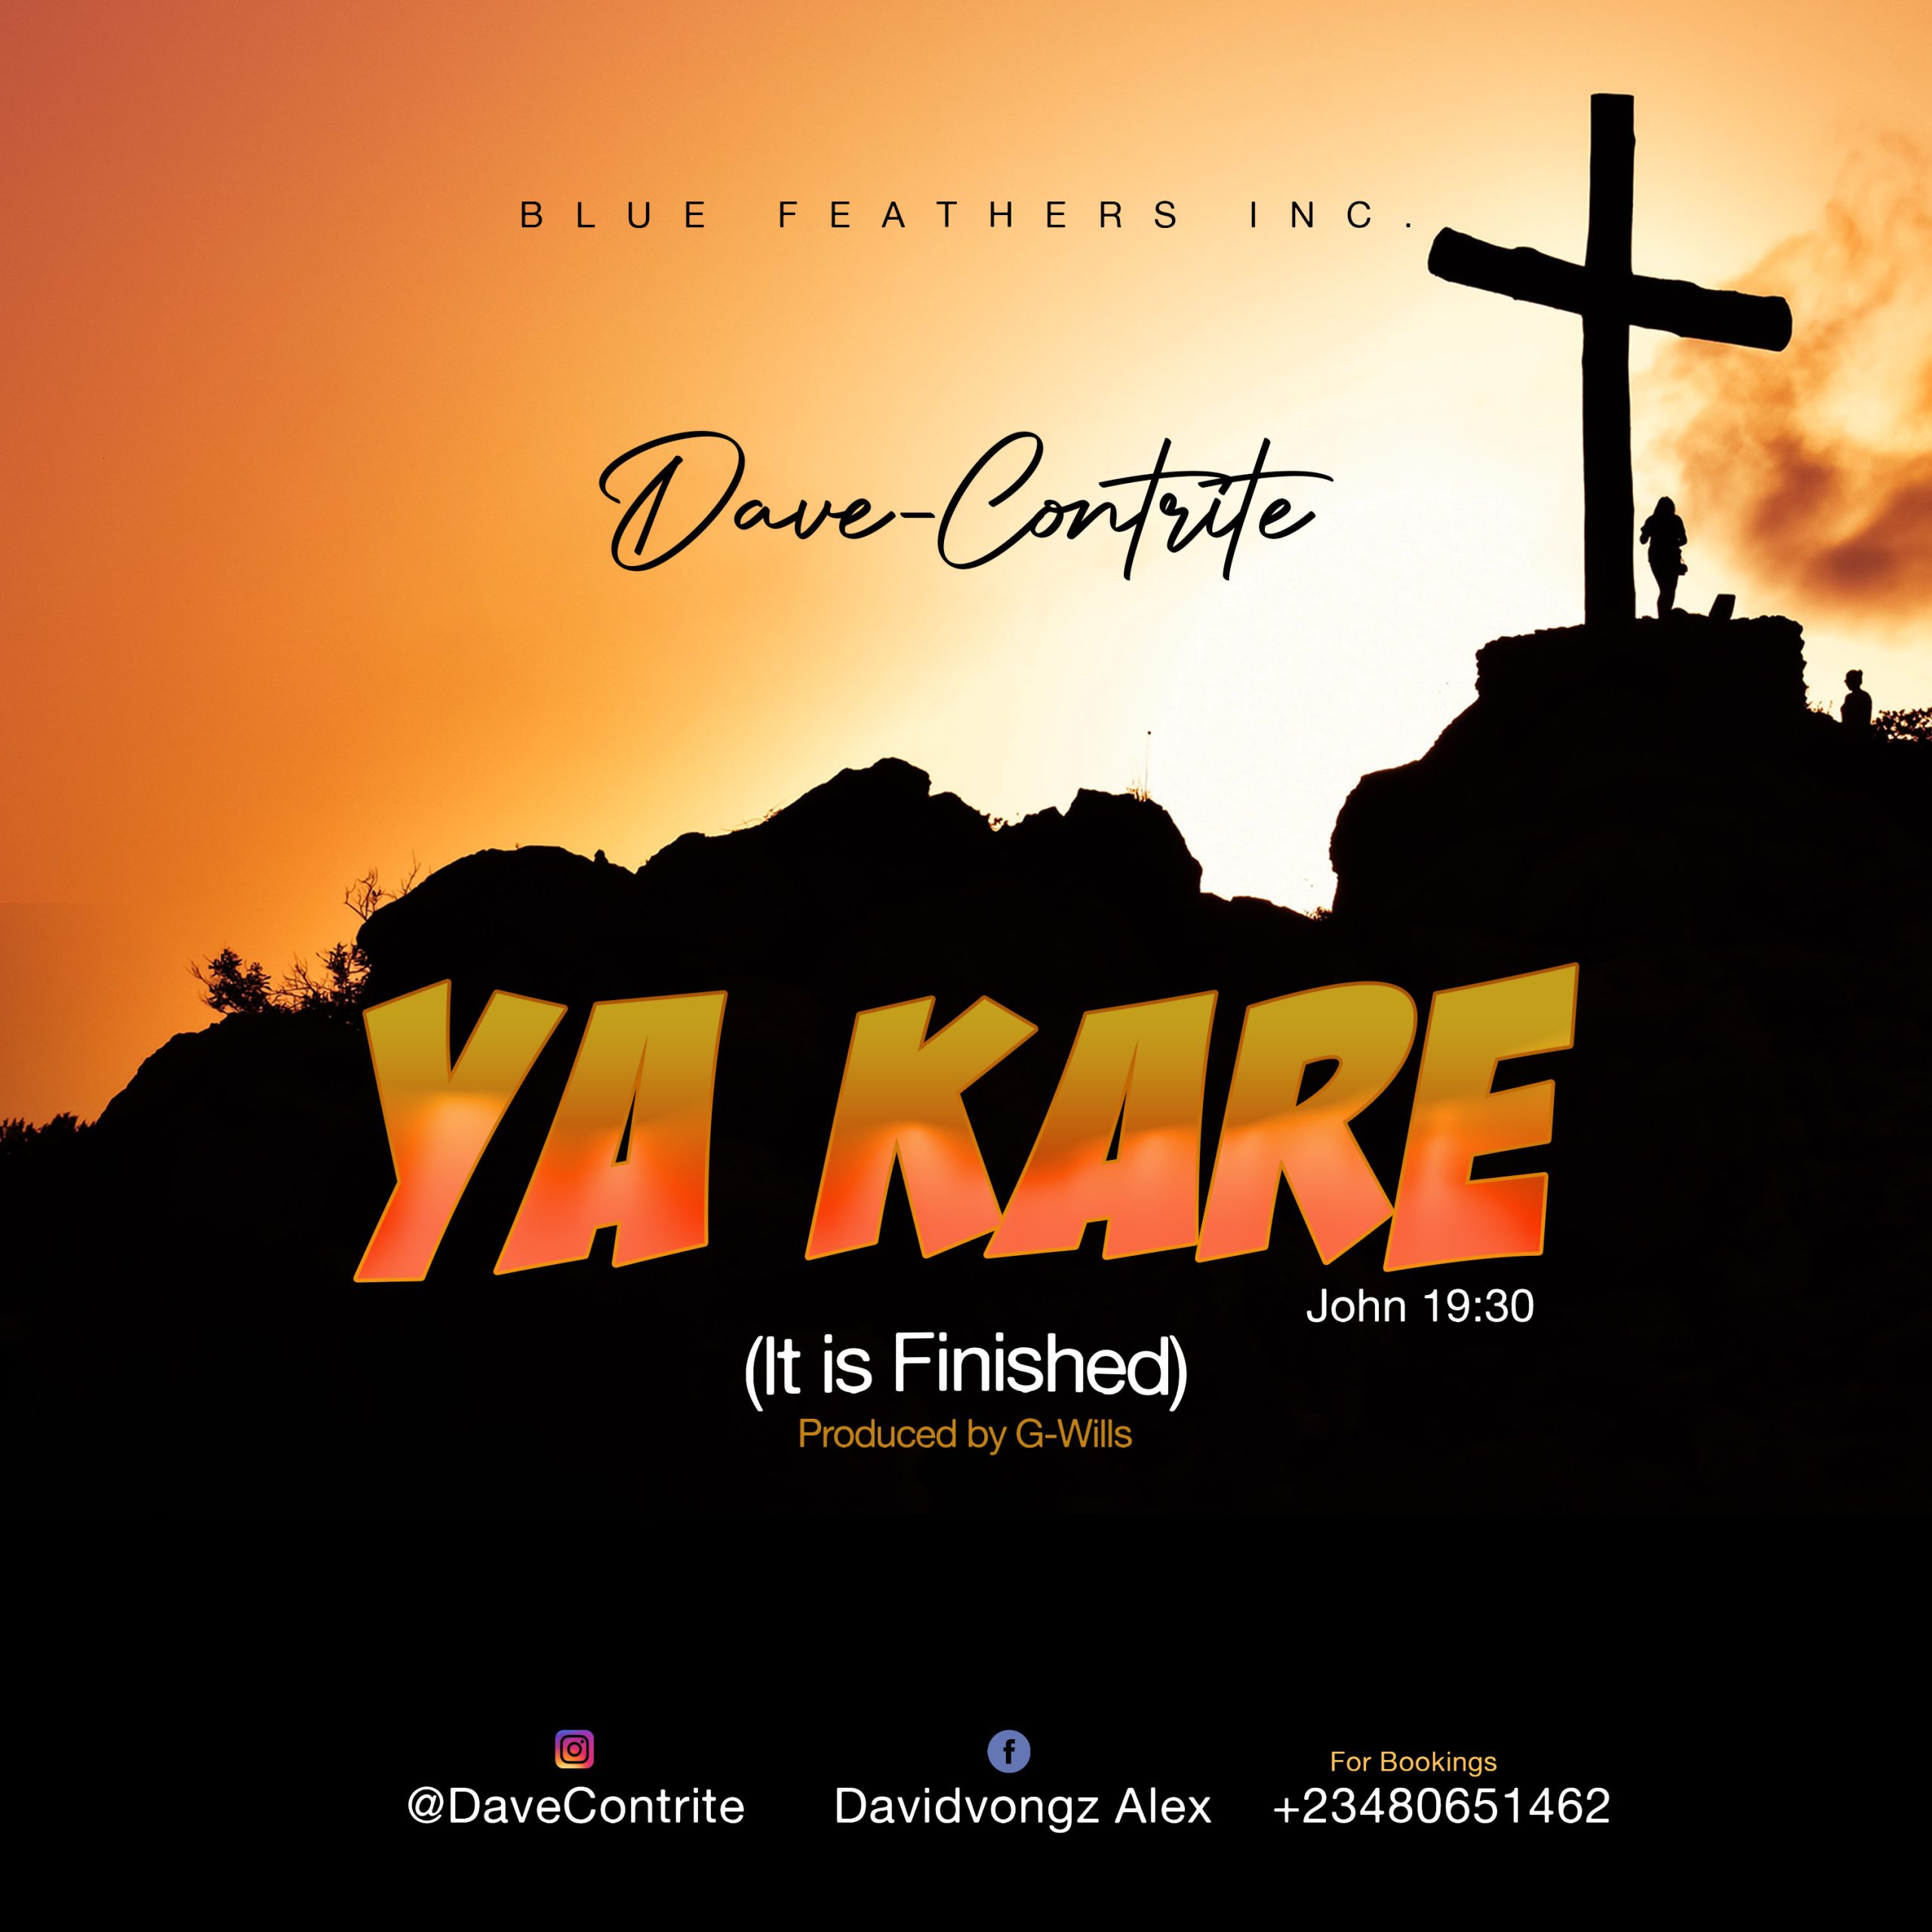 Download Mp3: Dave Contrite - Ya Kare (It Is Finished)